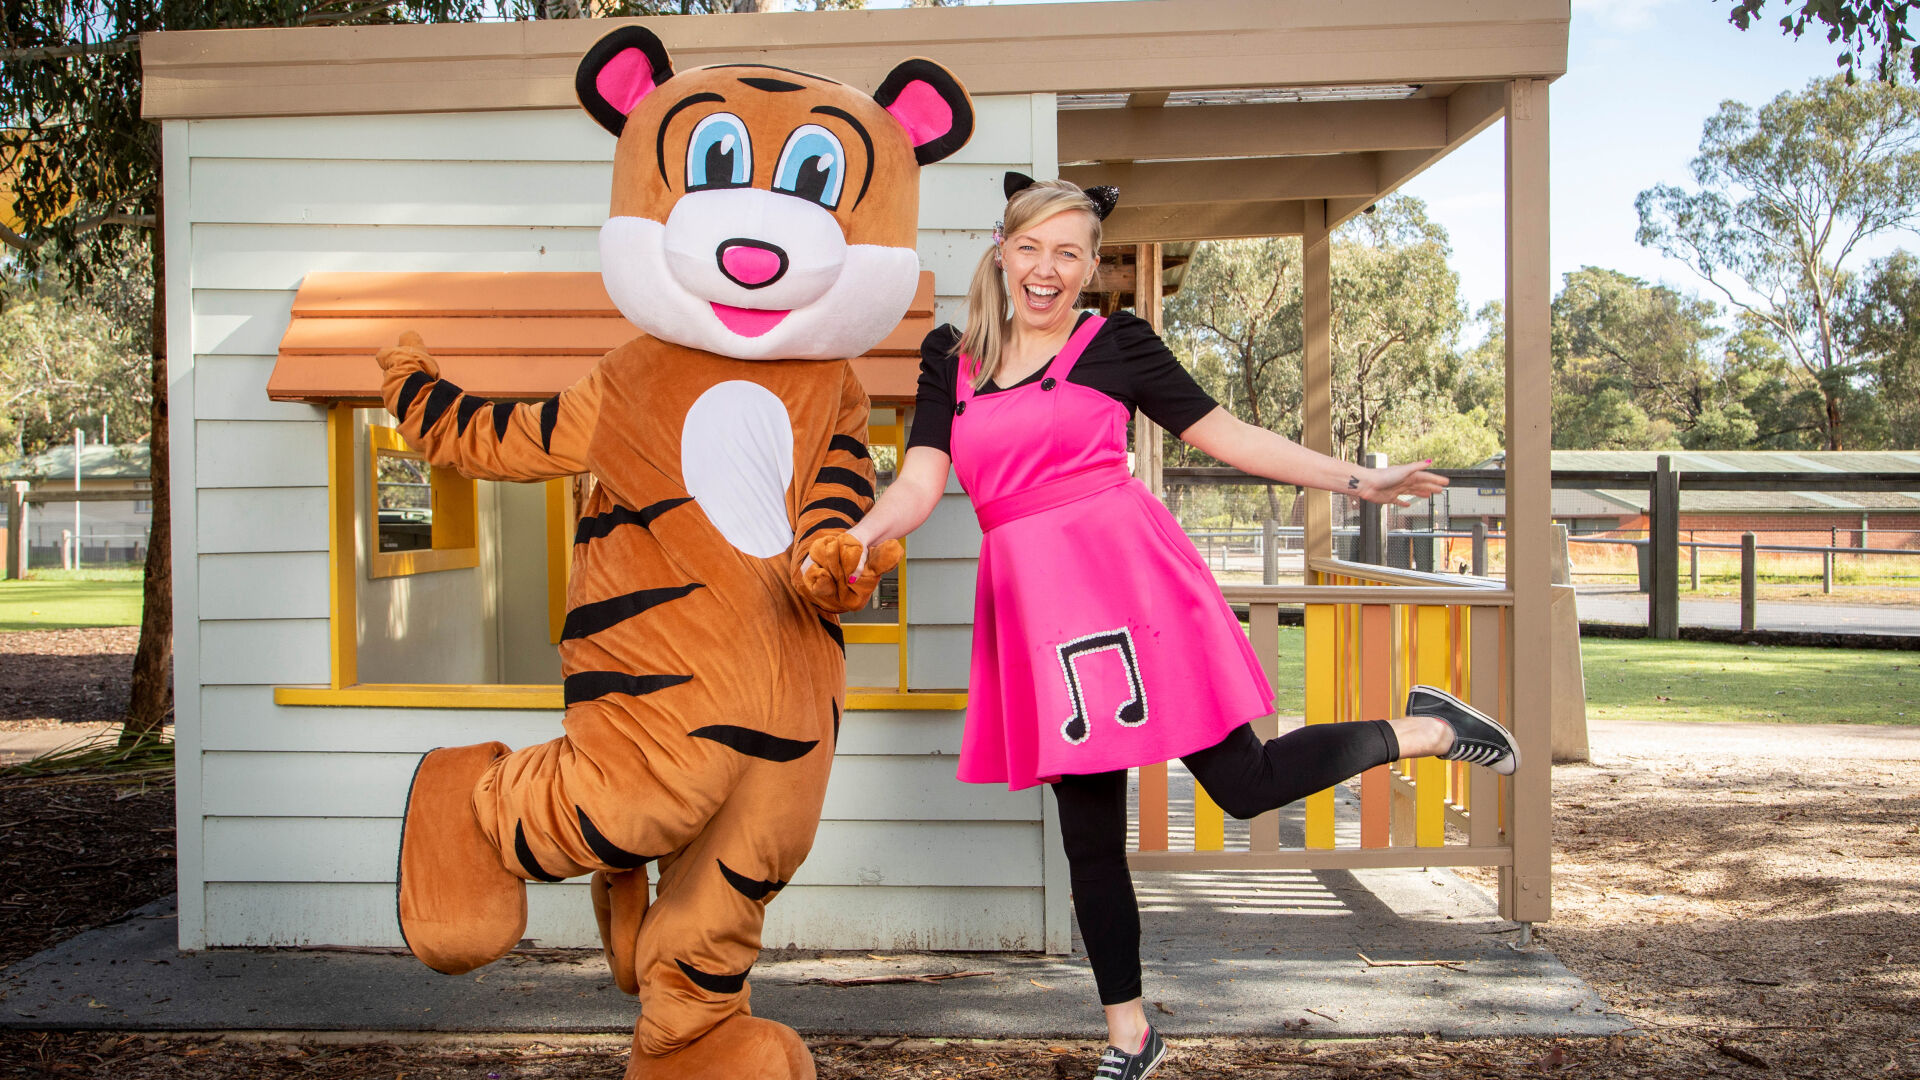 Sarah and Pevan the Tiger Mascot pose while holding hands and kicking one leg up with smiling faces